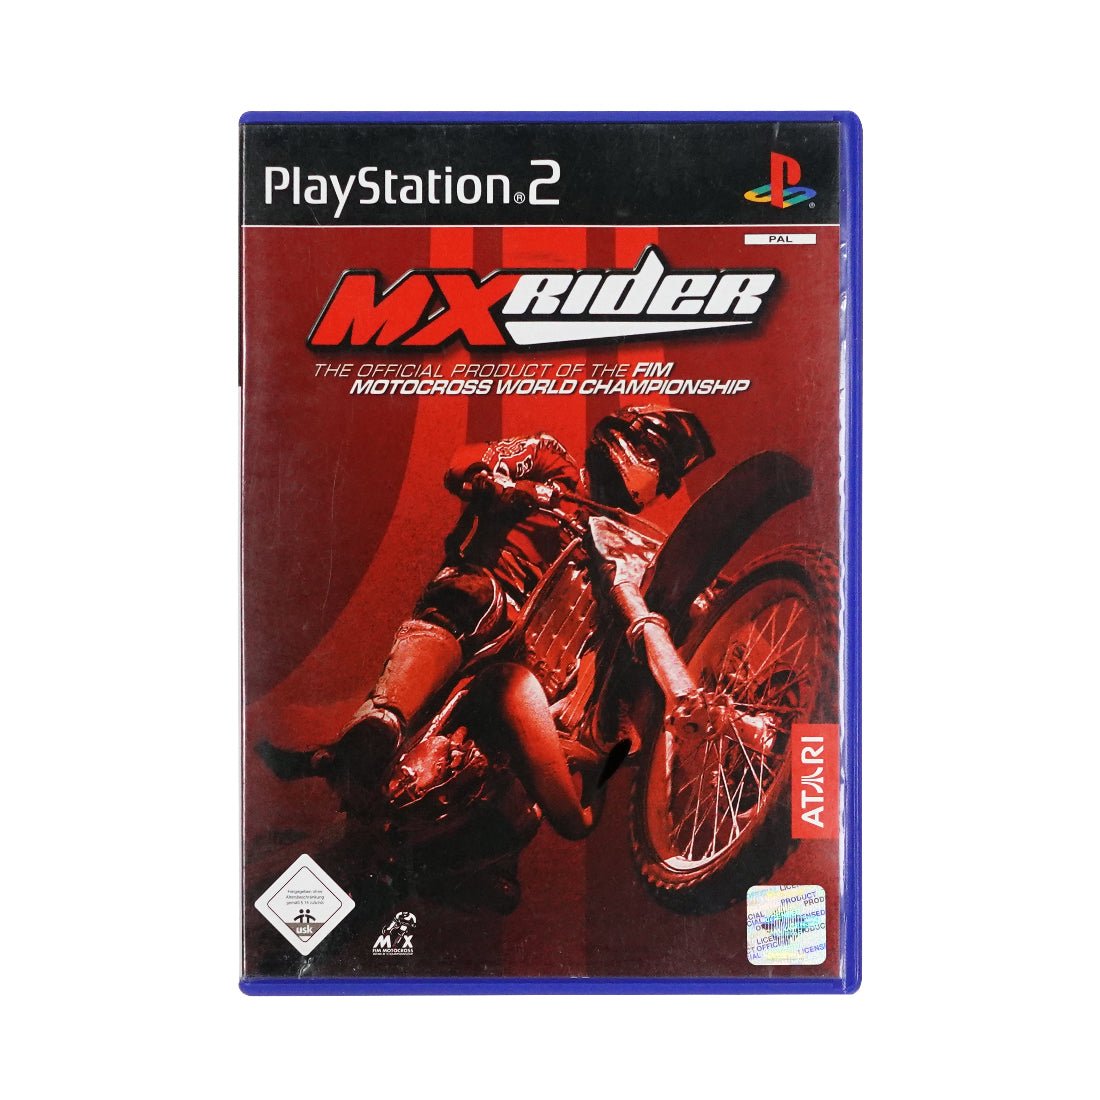 (Pre-Owned) Mx Rider - PlayStation 2 - Store 974 | ستور ٩٧٤